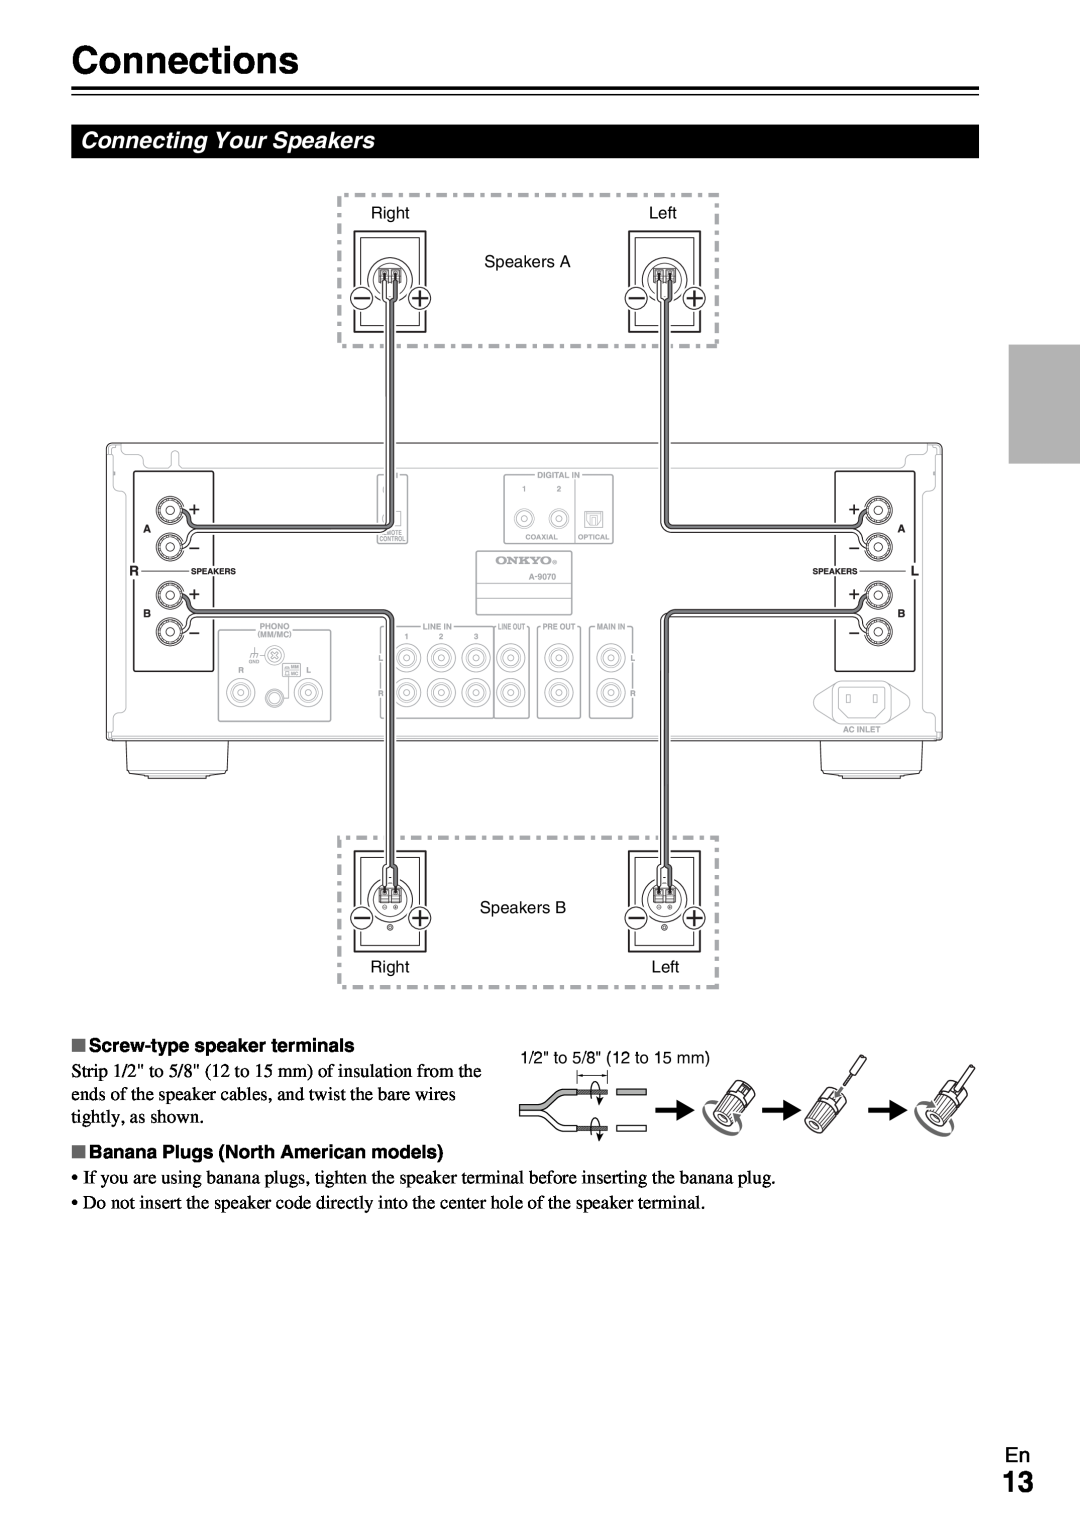 Onkyo A-9070 instruction manual Connections, Connecting Your Speakers 